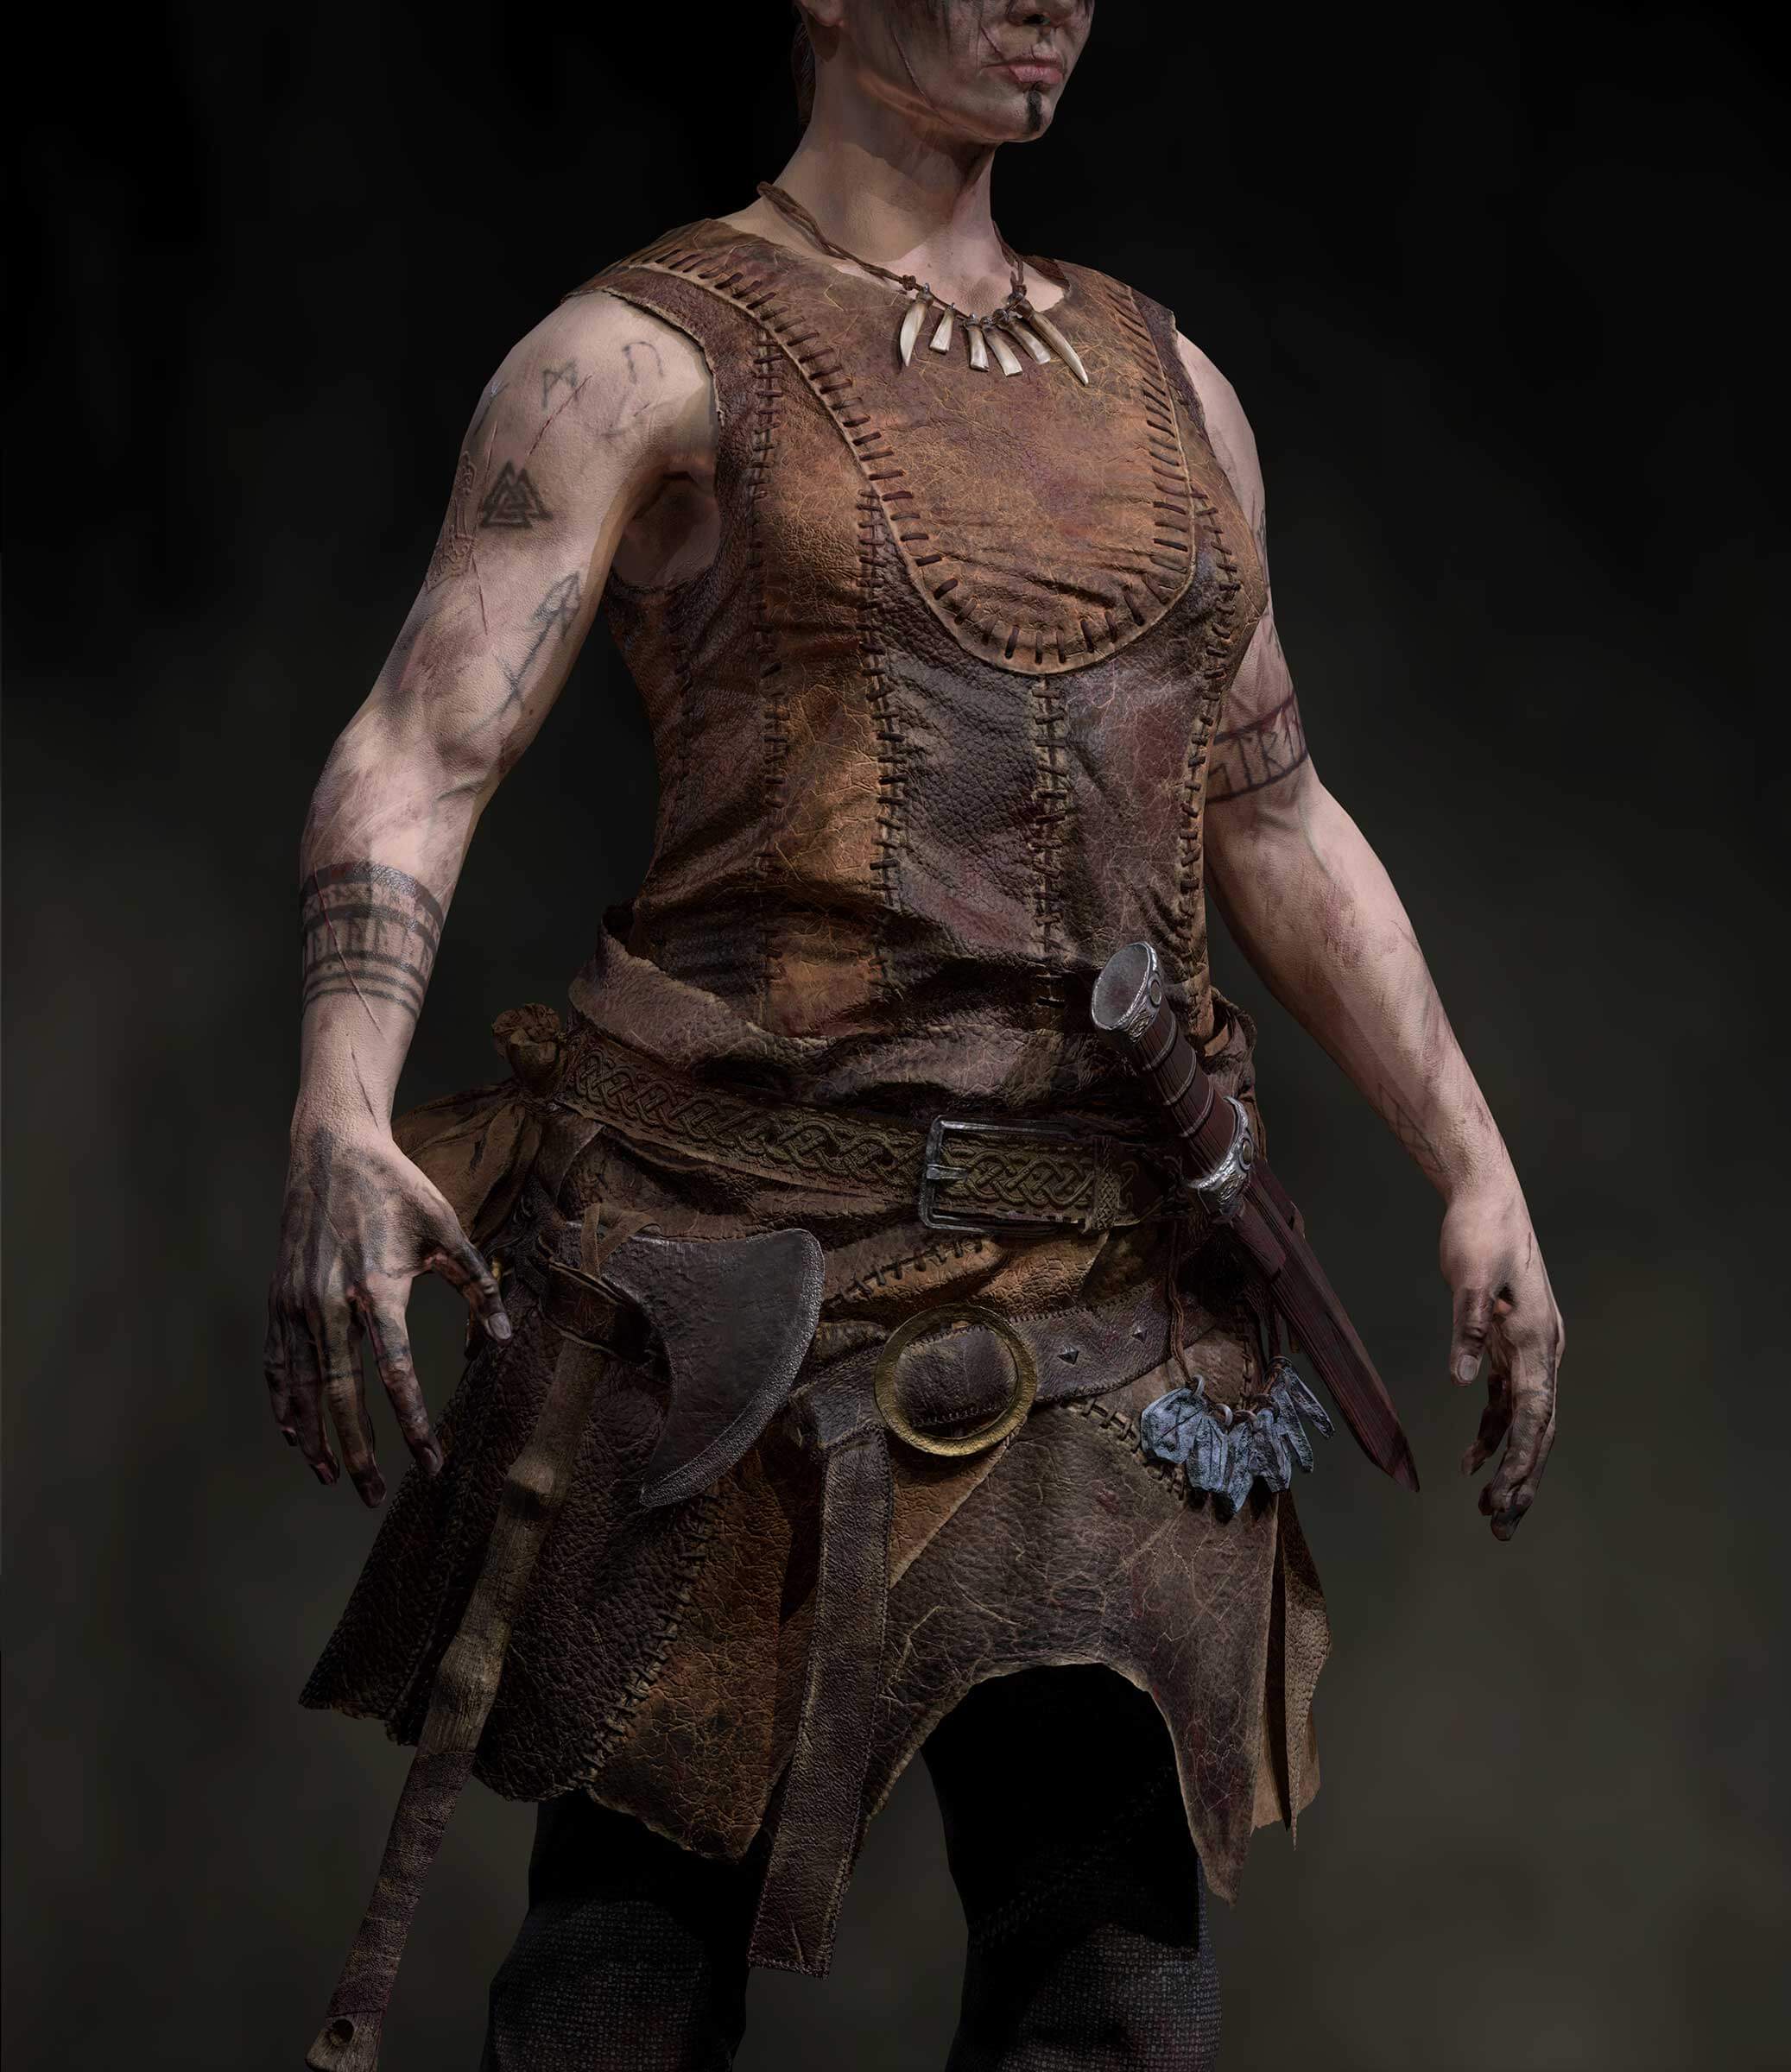 A closer look at the clothing of a woman dressed as hunter.